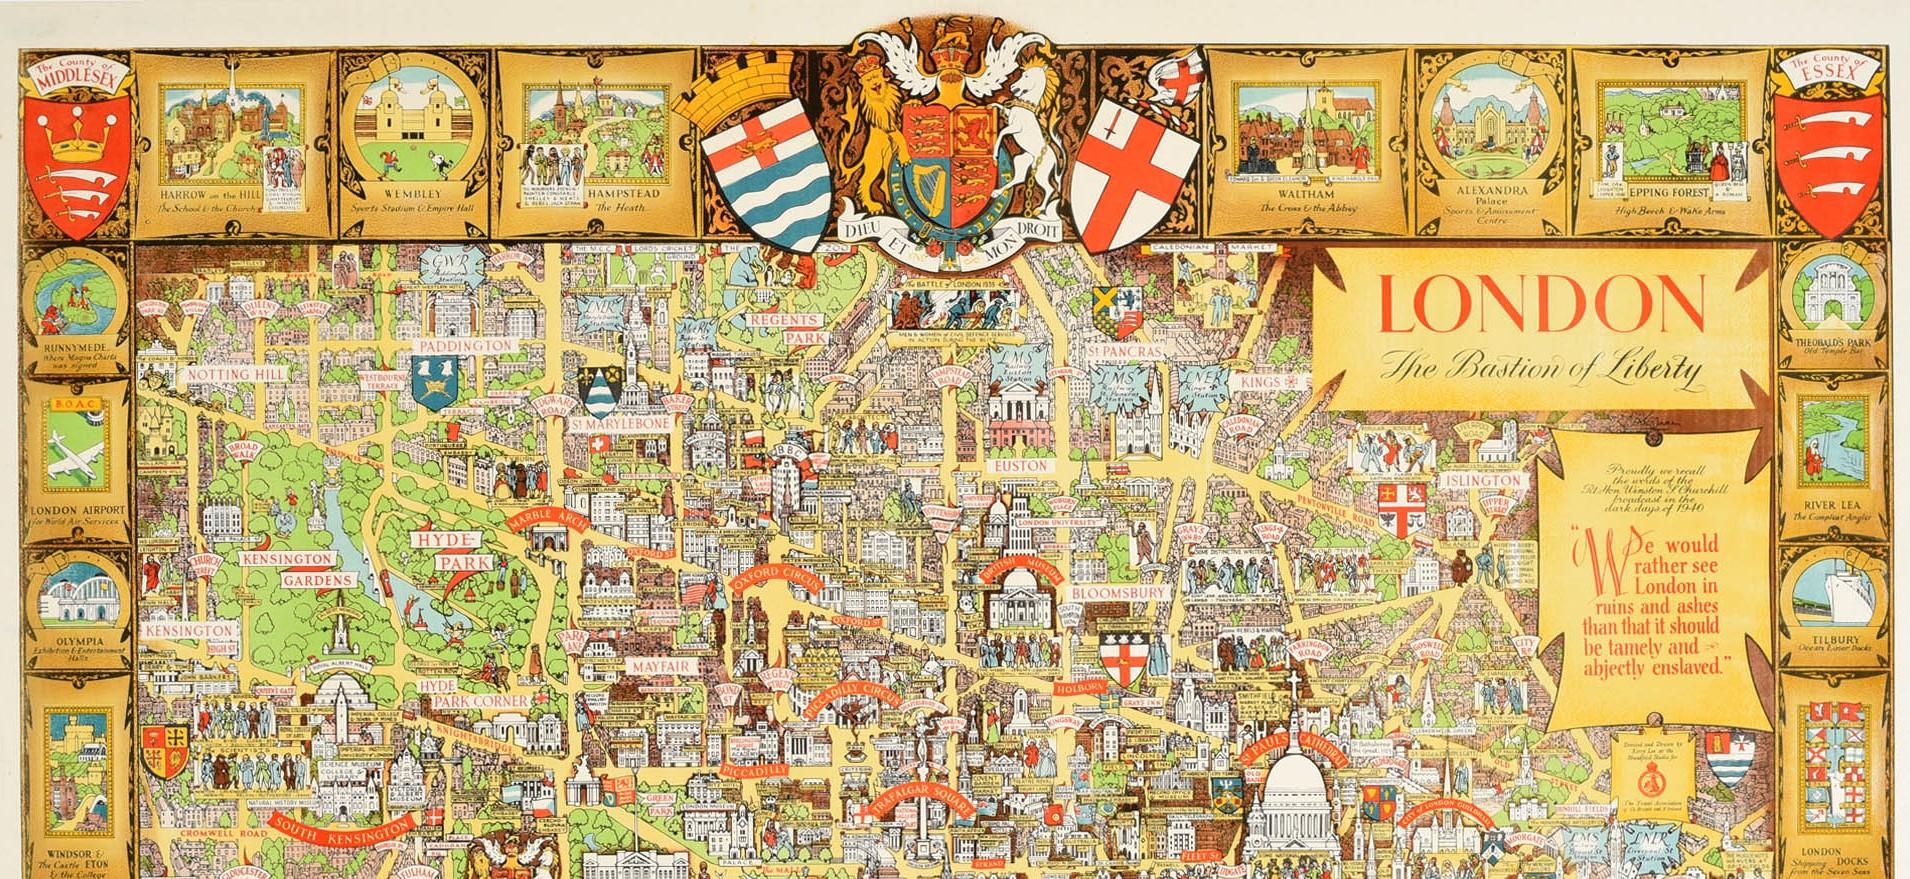 Original vintage travel map poster for London The Bastion of Liberty by the British artist, illustrator and poster designer Kerry Lee (1902-1988) to encourage tourism after World War Two featuring a detailed pictorial map of London with its notable